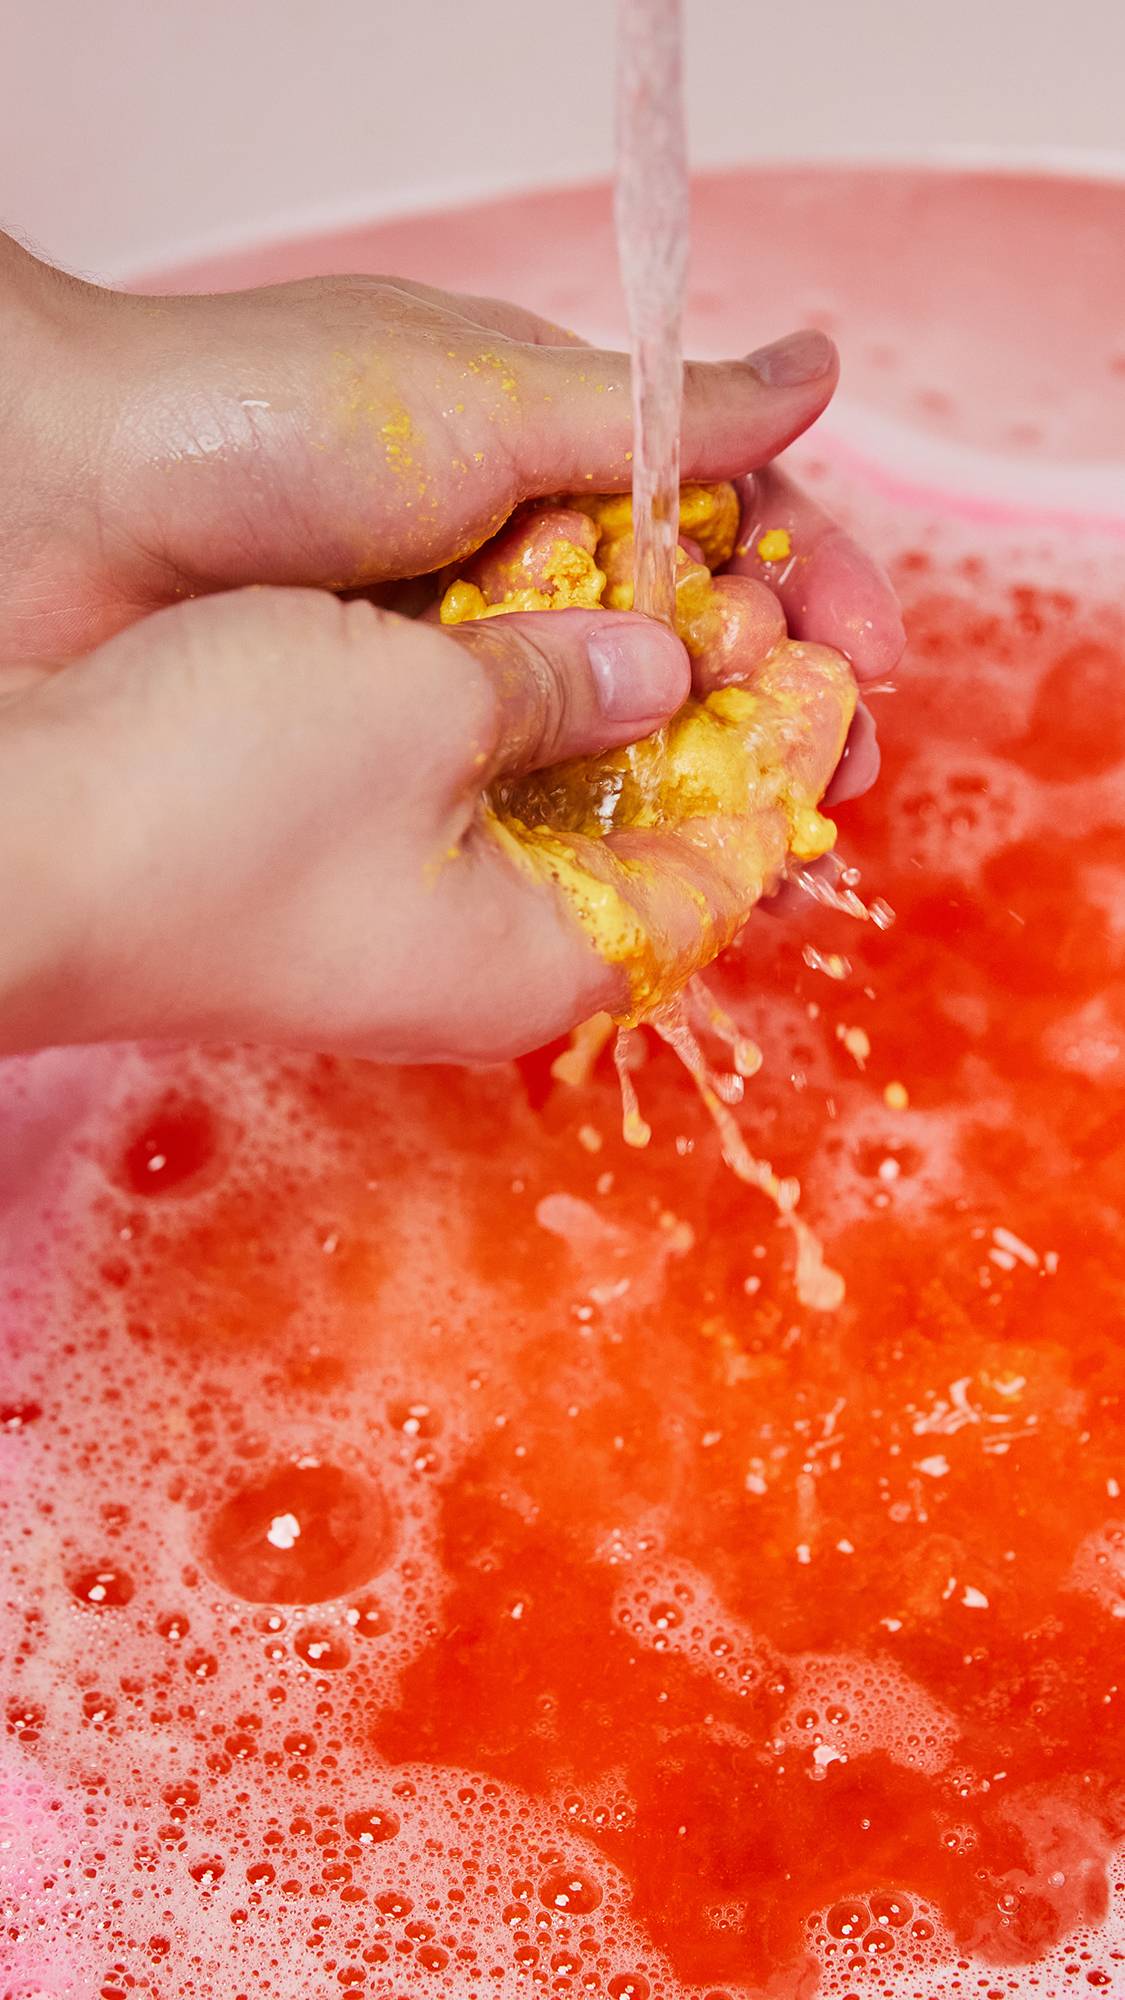 The image shows the model using the burger patty bubble bar as they crumble it under running water.